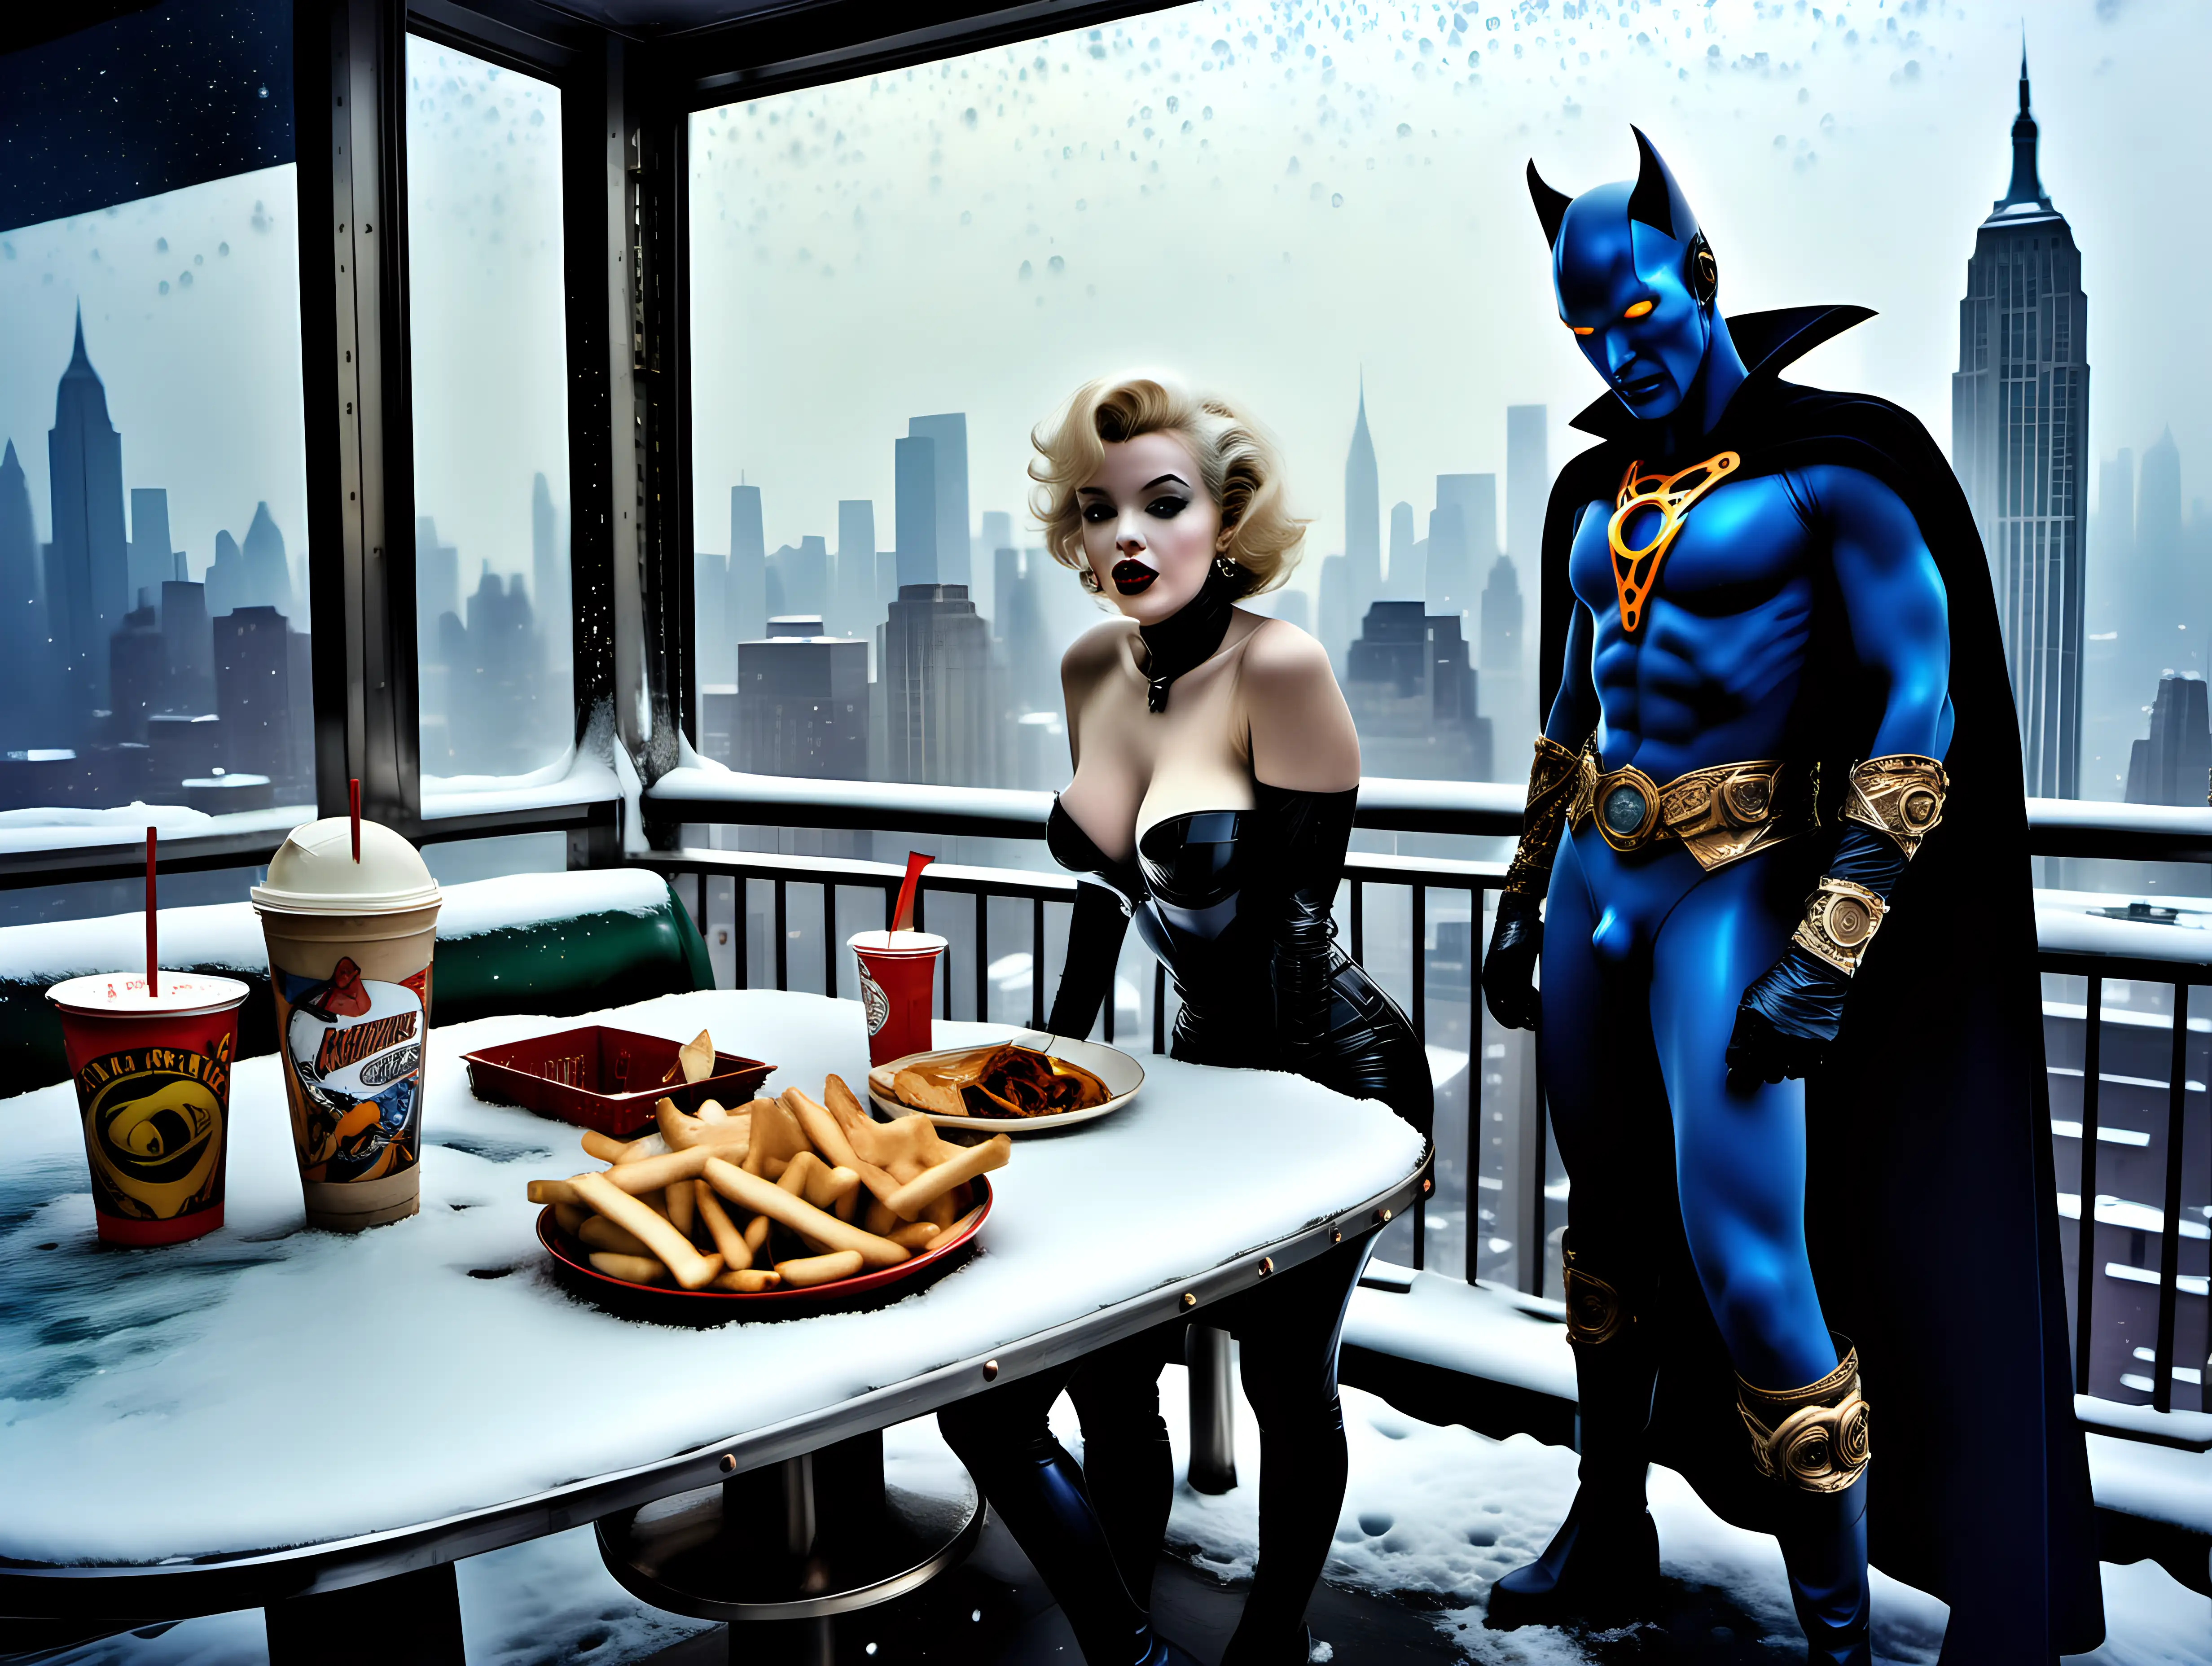 wide view nude Marilyn Monroe as Cat woman and Doctor Strange on a date in a fast food joint overlooking NYC during a snow storm Frank Frazetta style